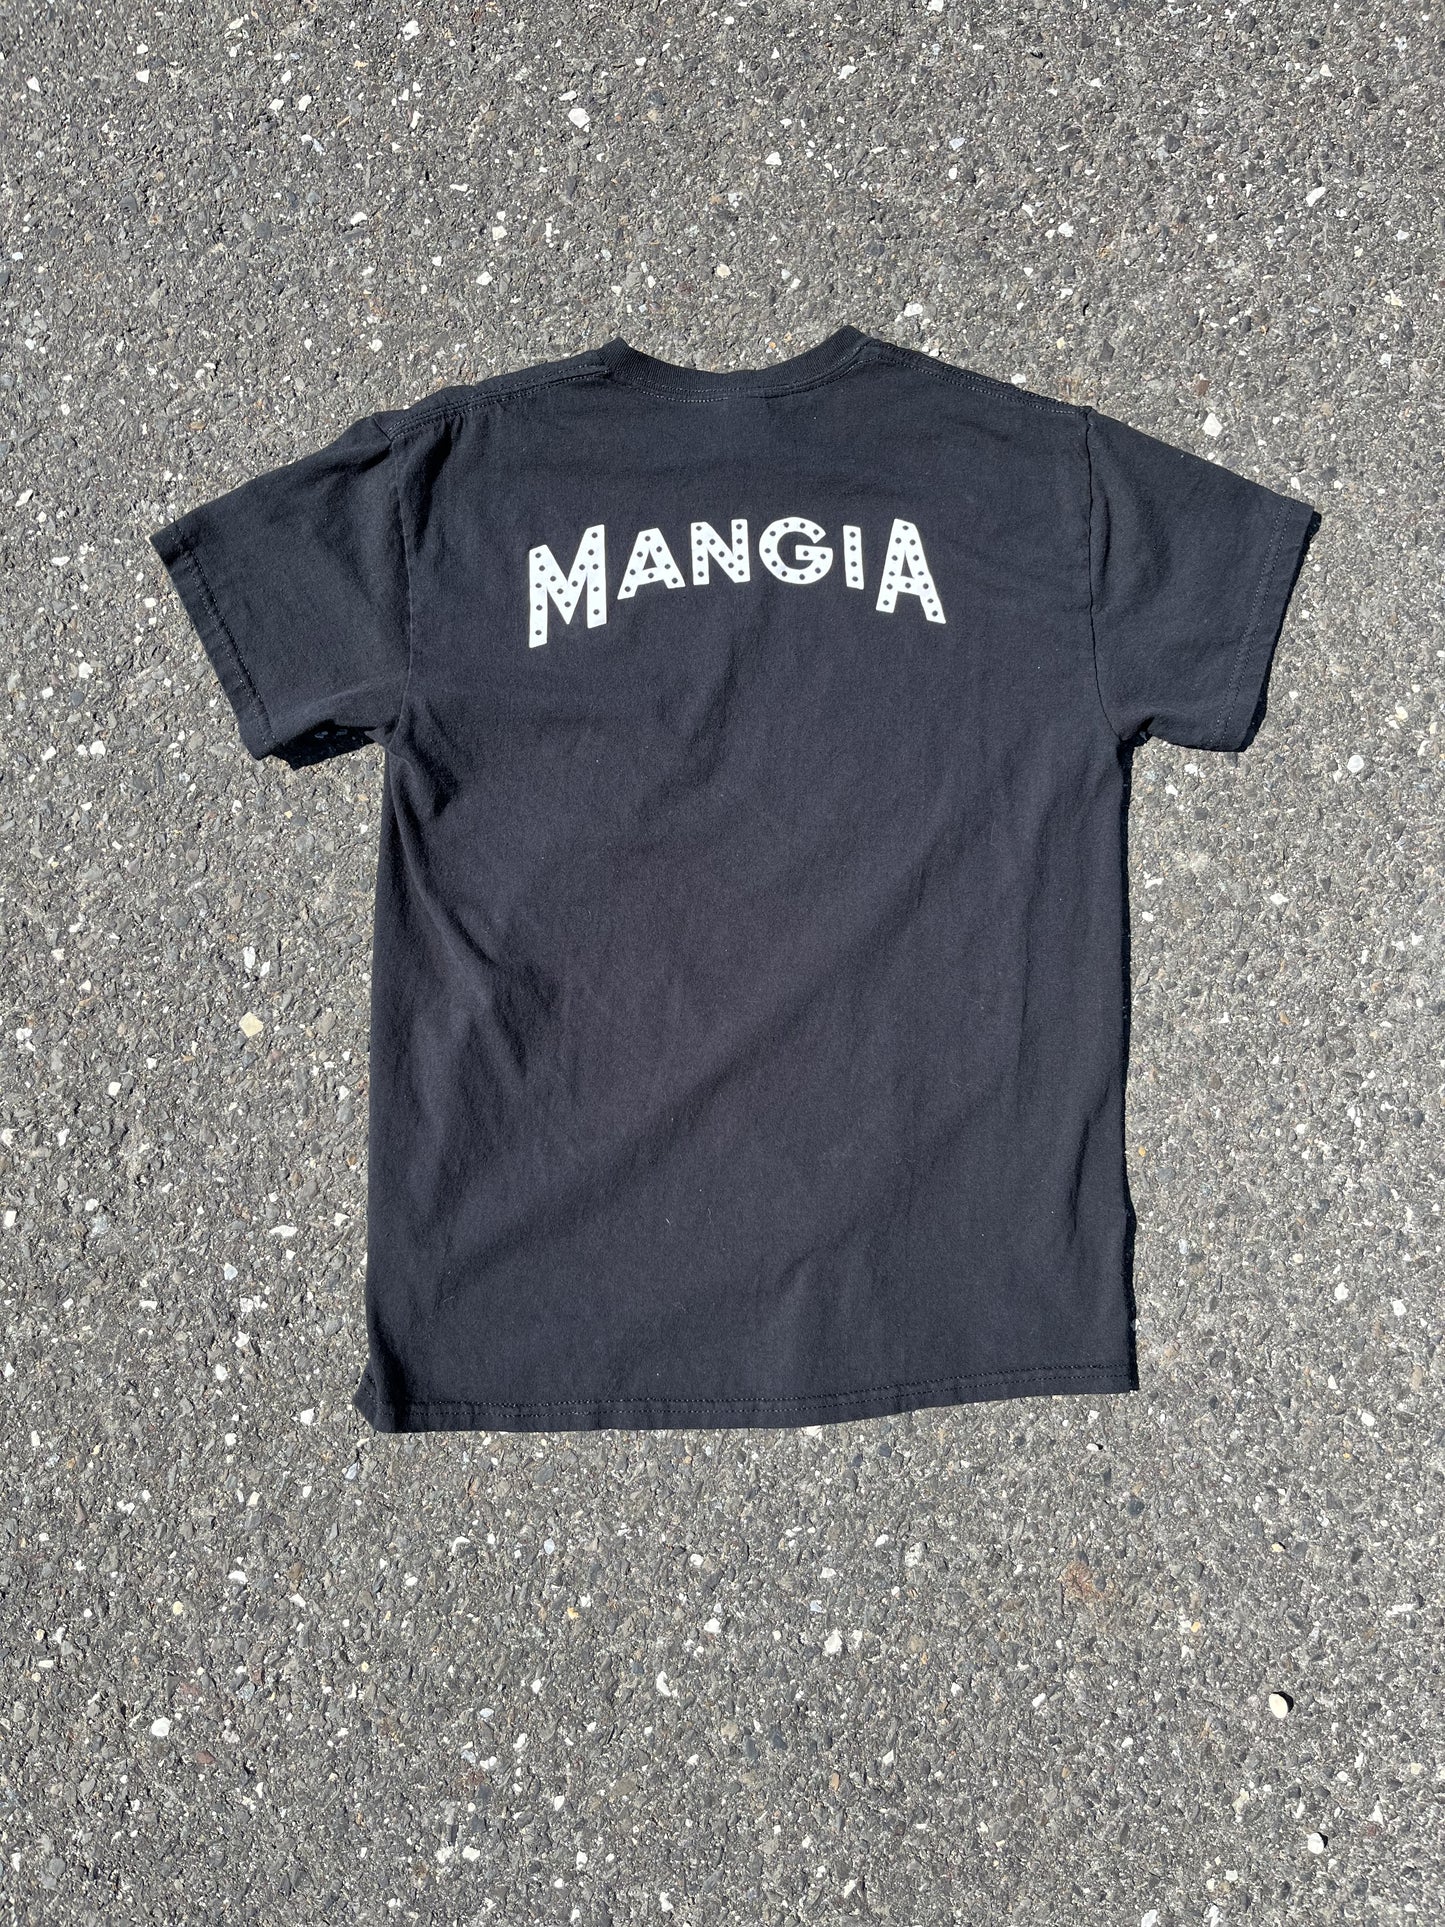 Mangia Tee (Front+Back)